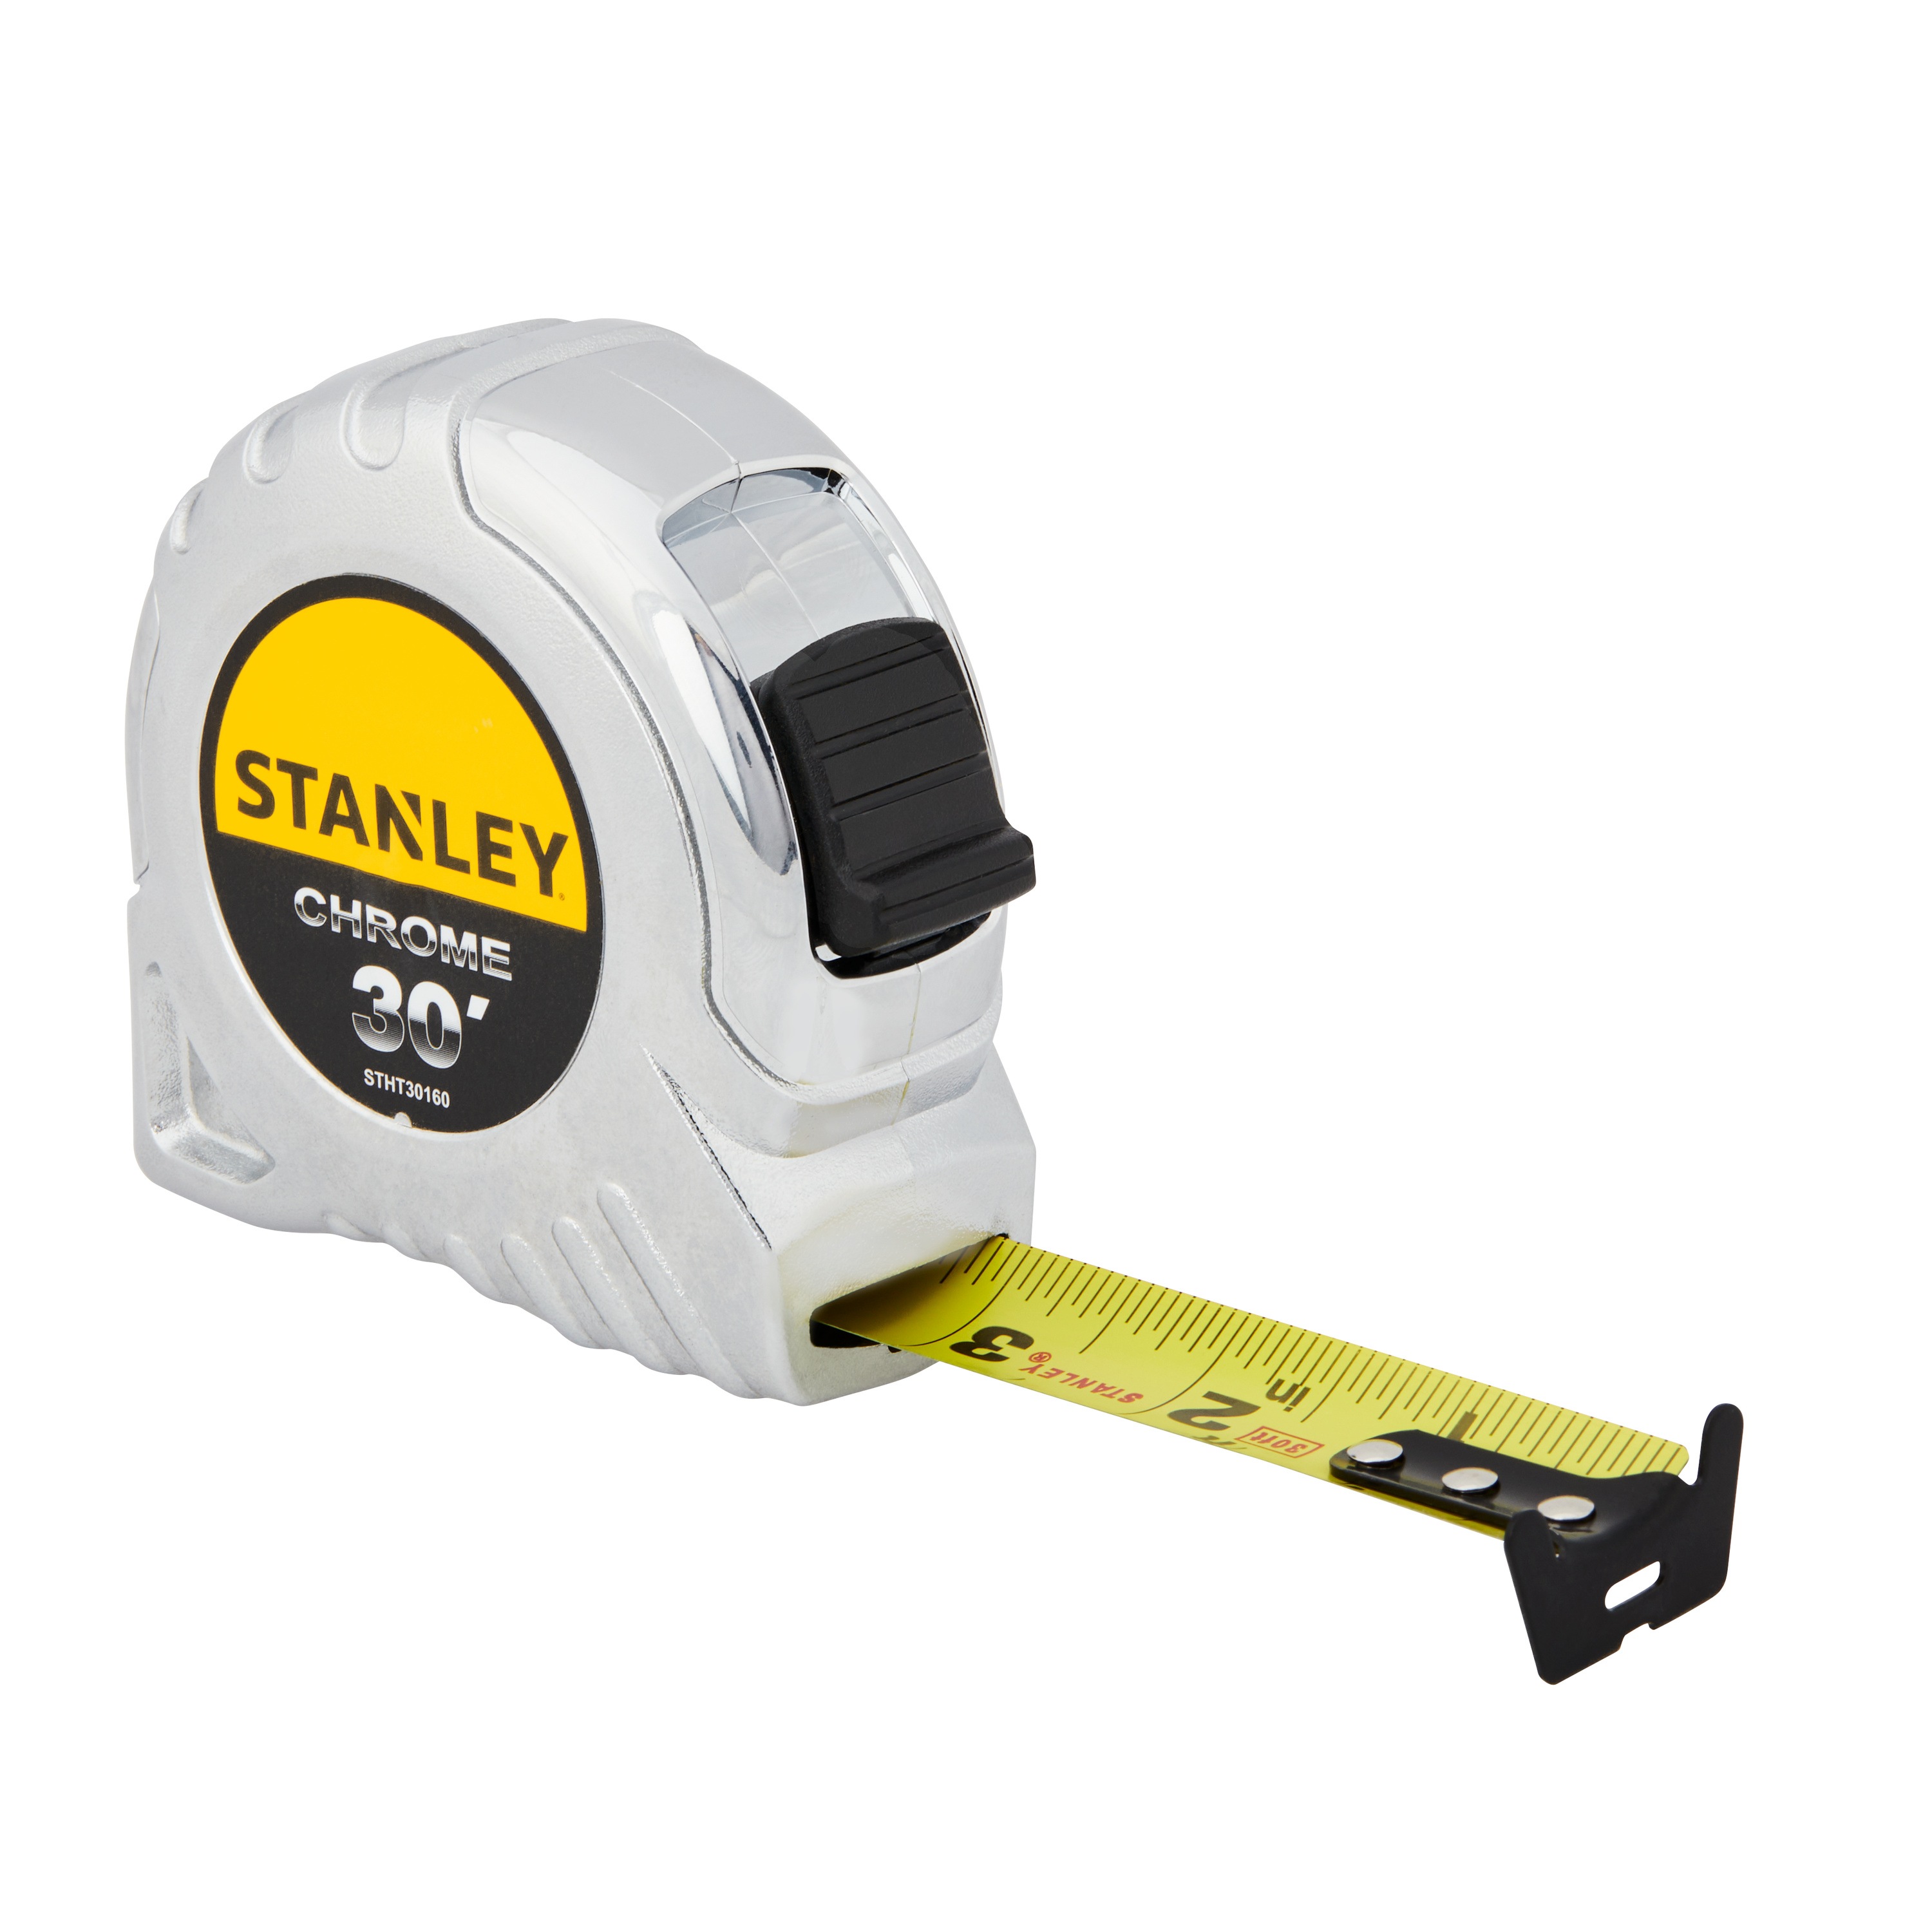 Stanley Tools - 30 ft Chrome Tape Measure - STHT30160W